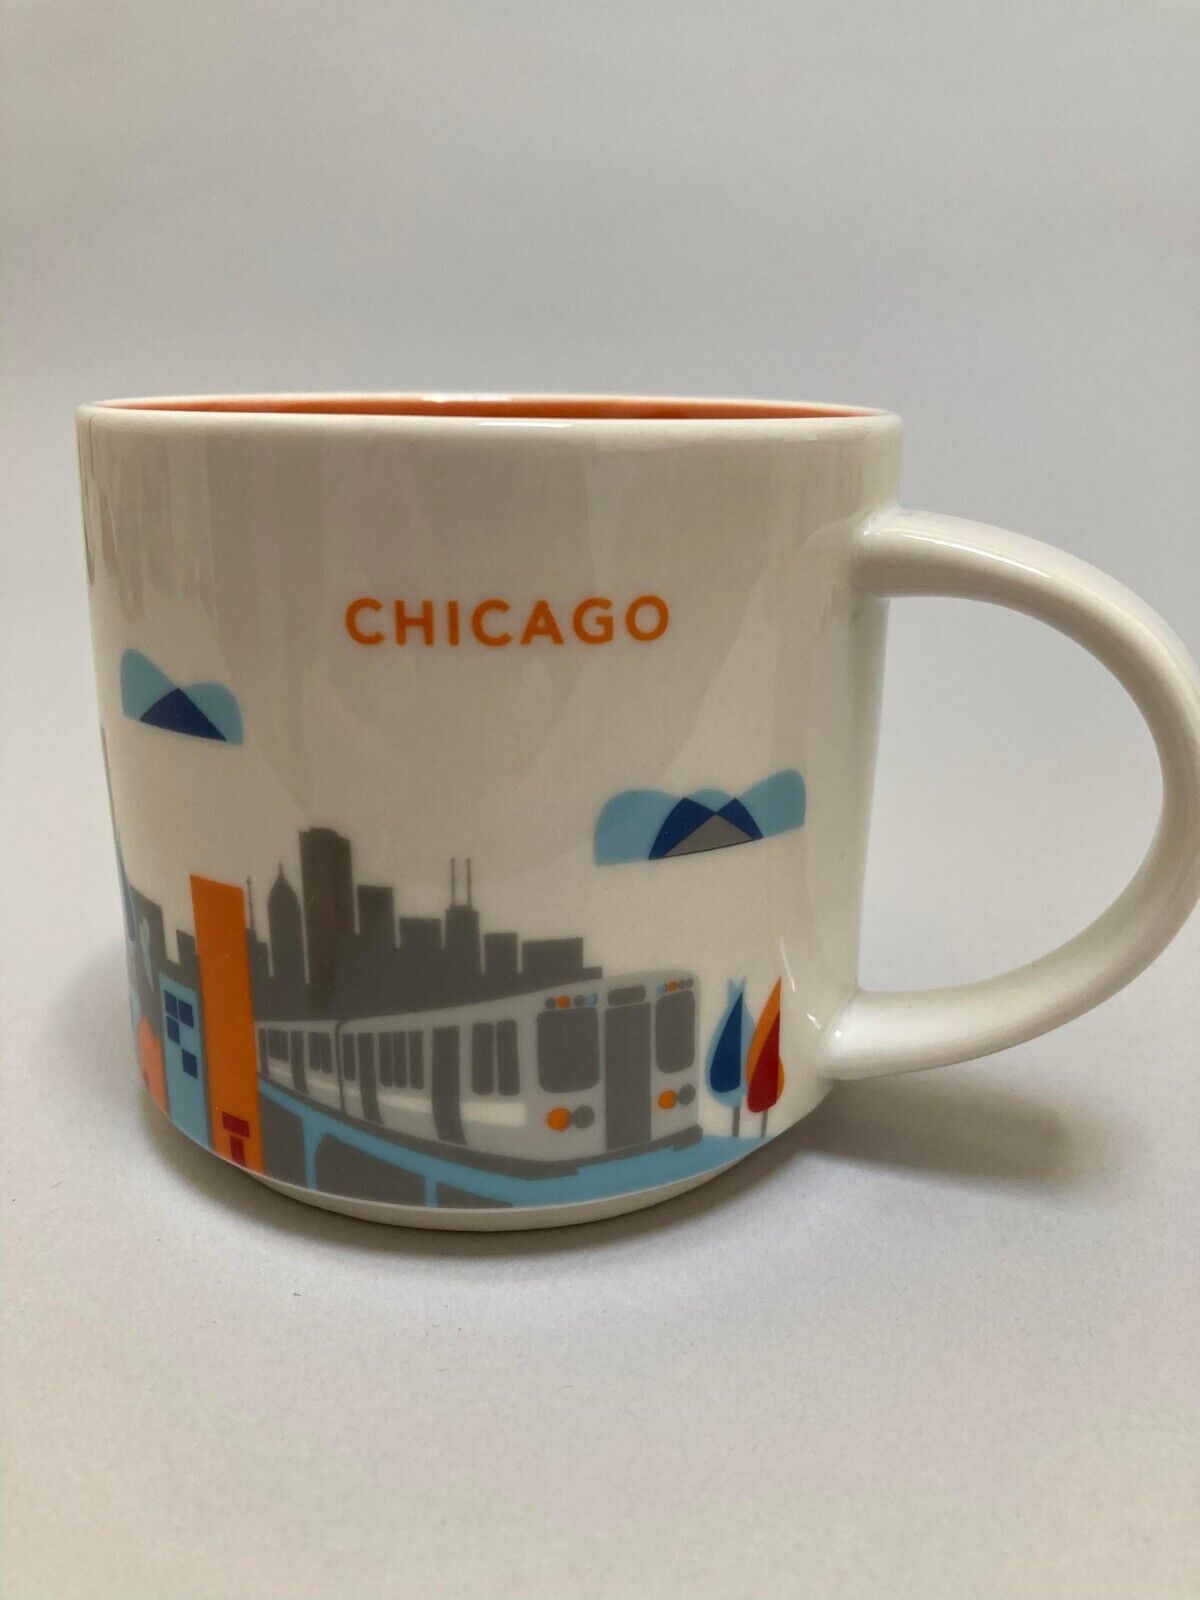 Starbucks You Are Here Collection Mug Chicago 2014 14 oz. Coffee Cup Ceramic